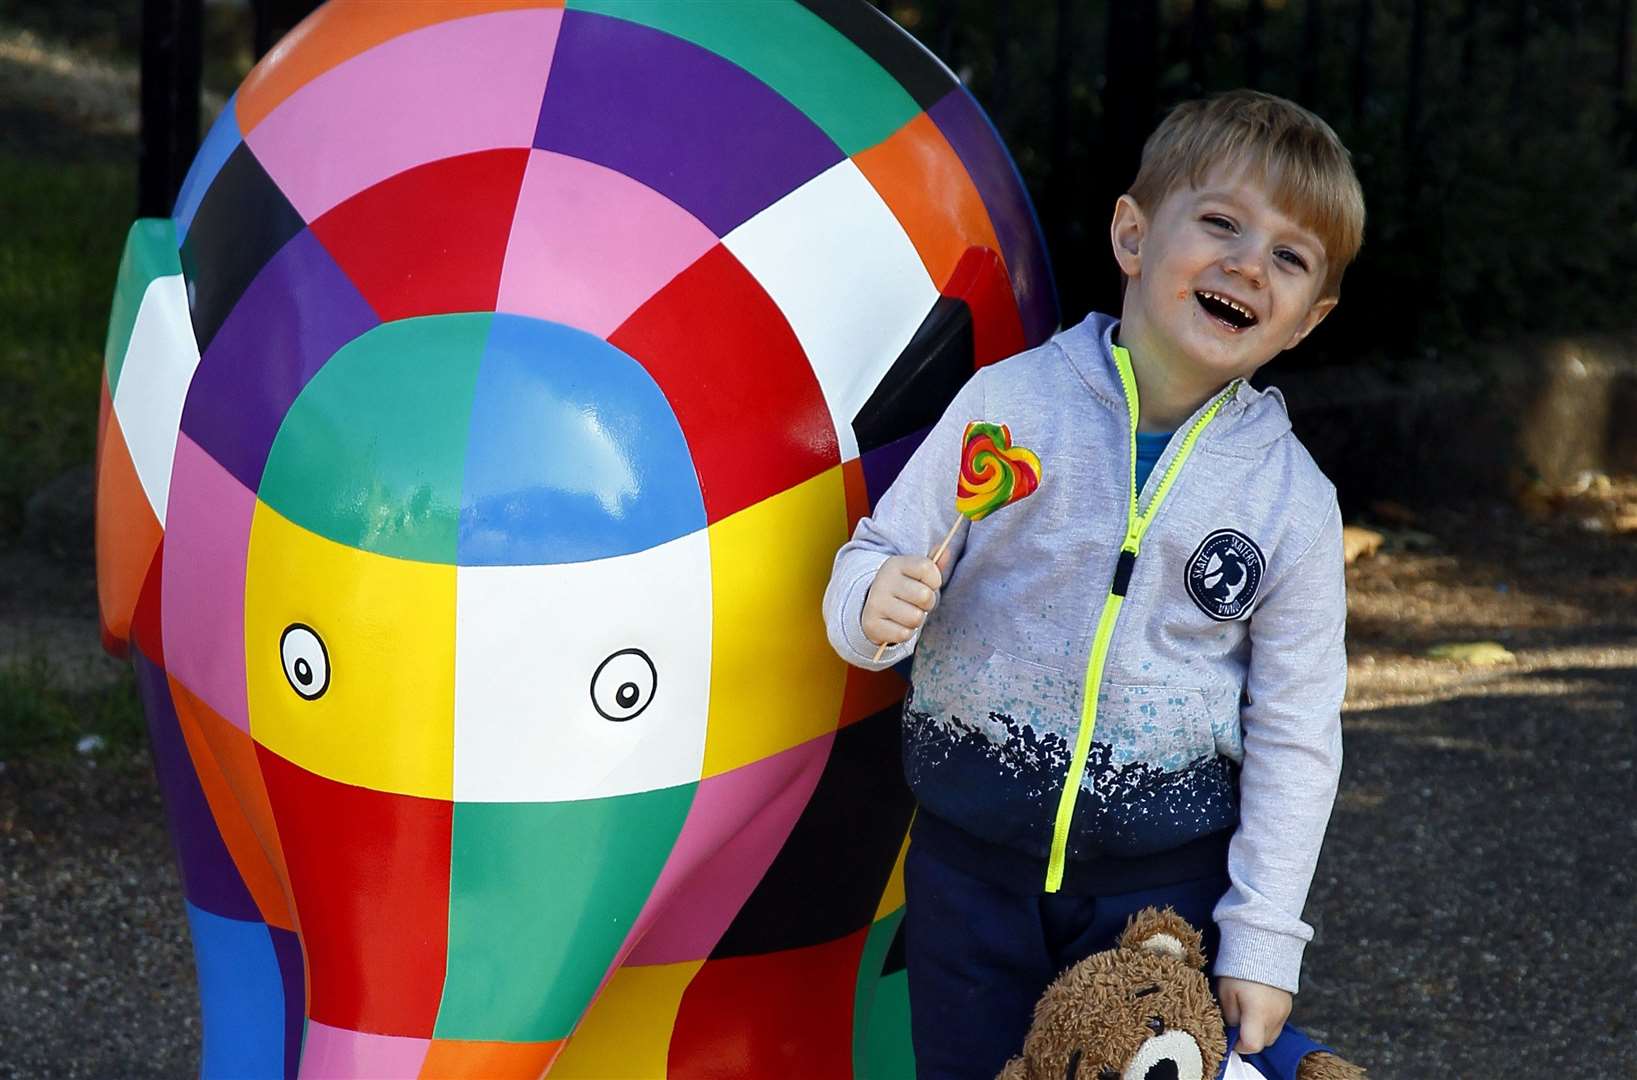 Elmer the Elephant Art Trail is coming to Maidstone later this year